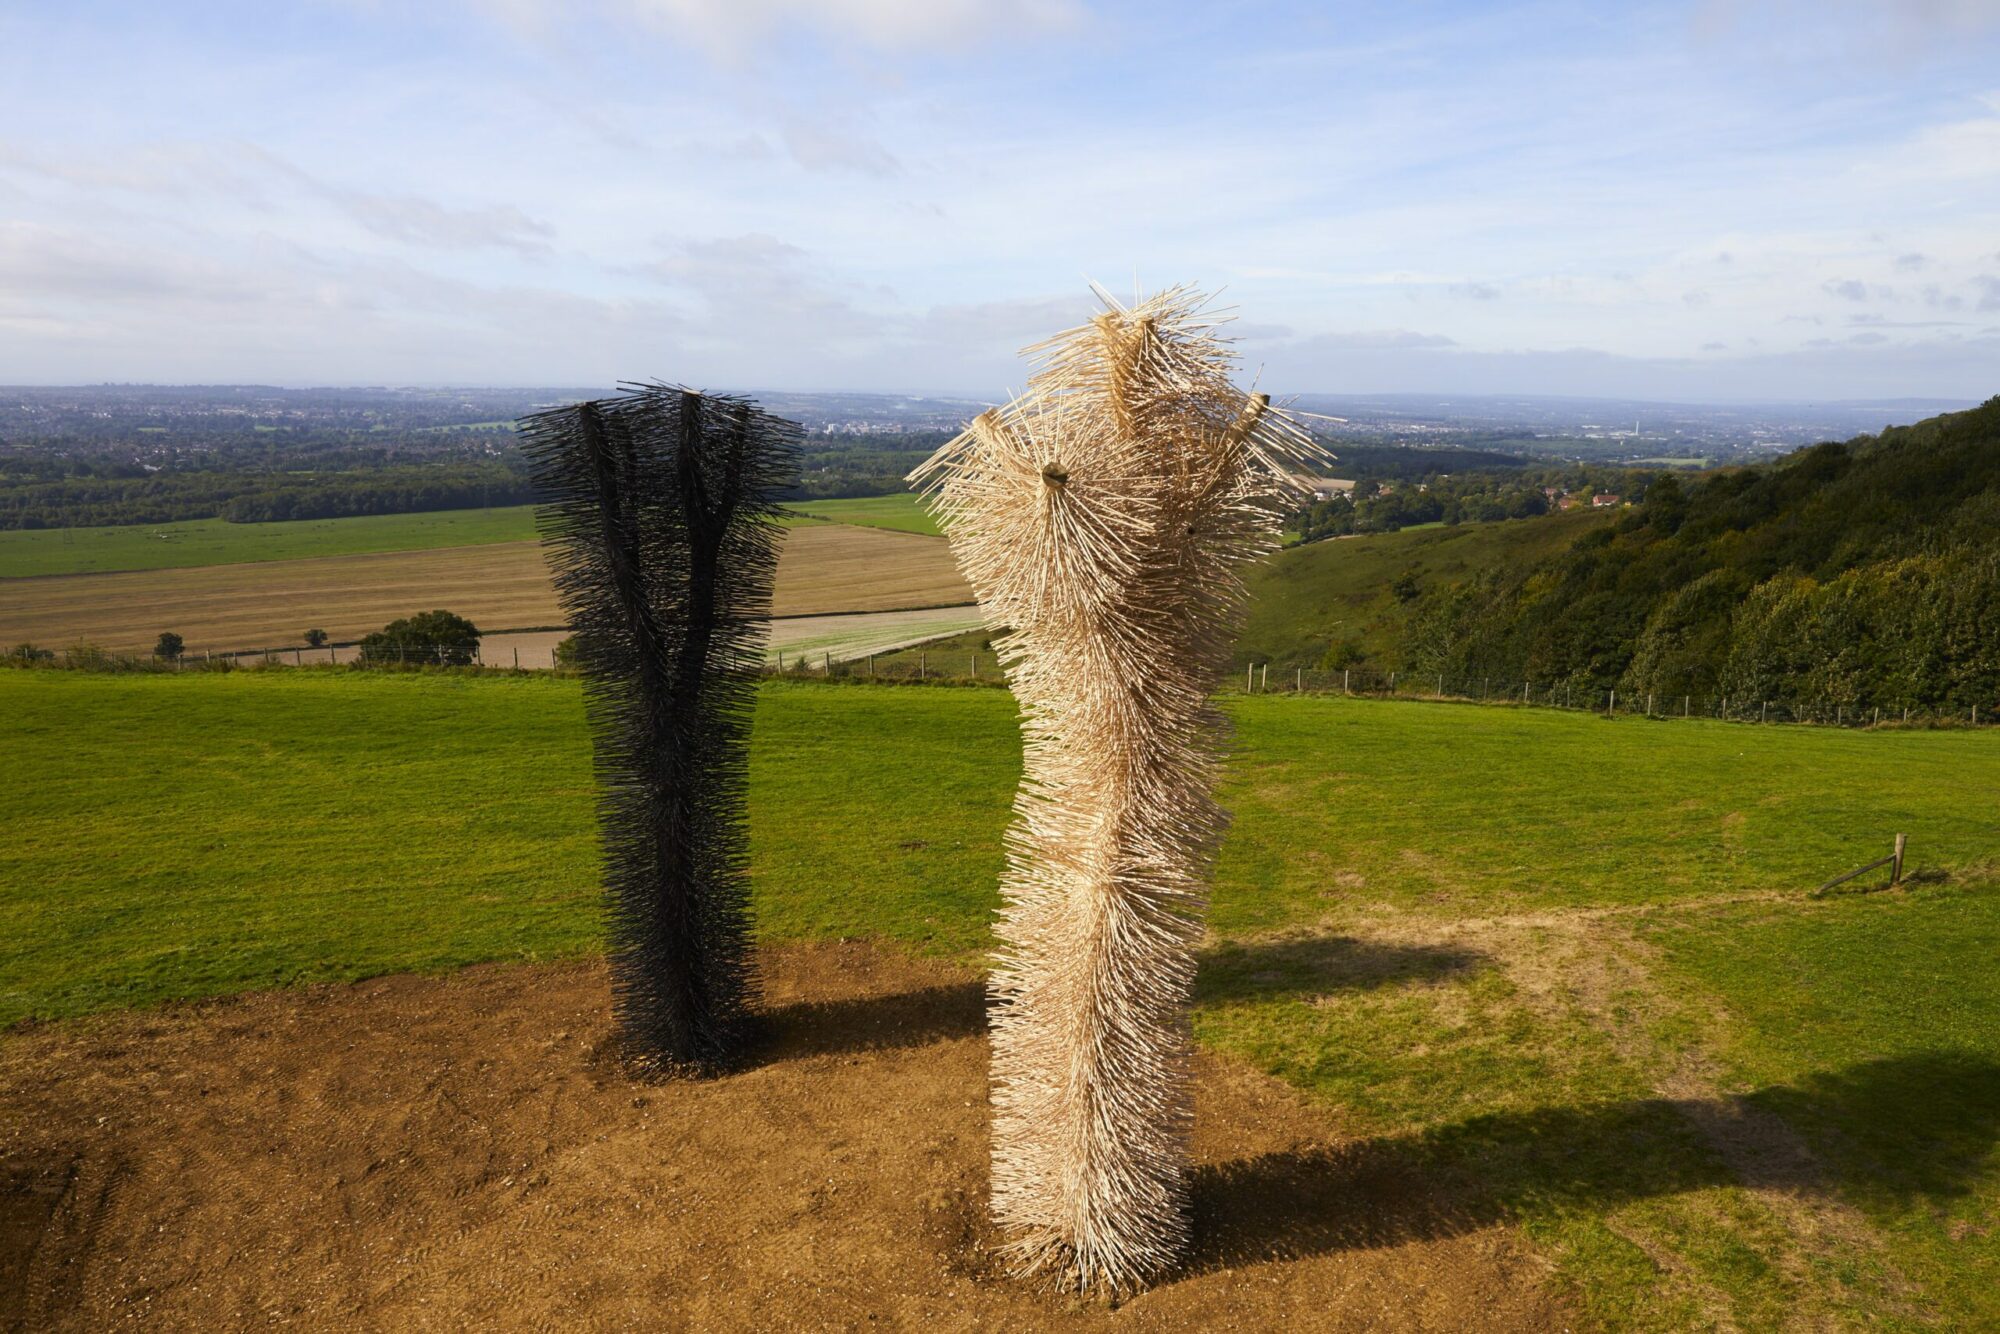 Ash to Ash sculpture by Ackroyd & Harvey